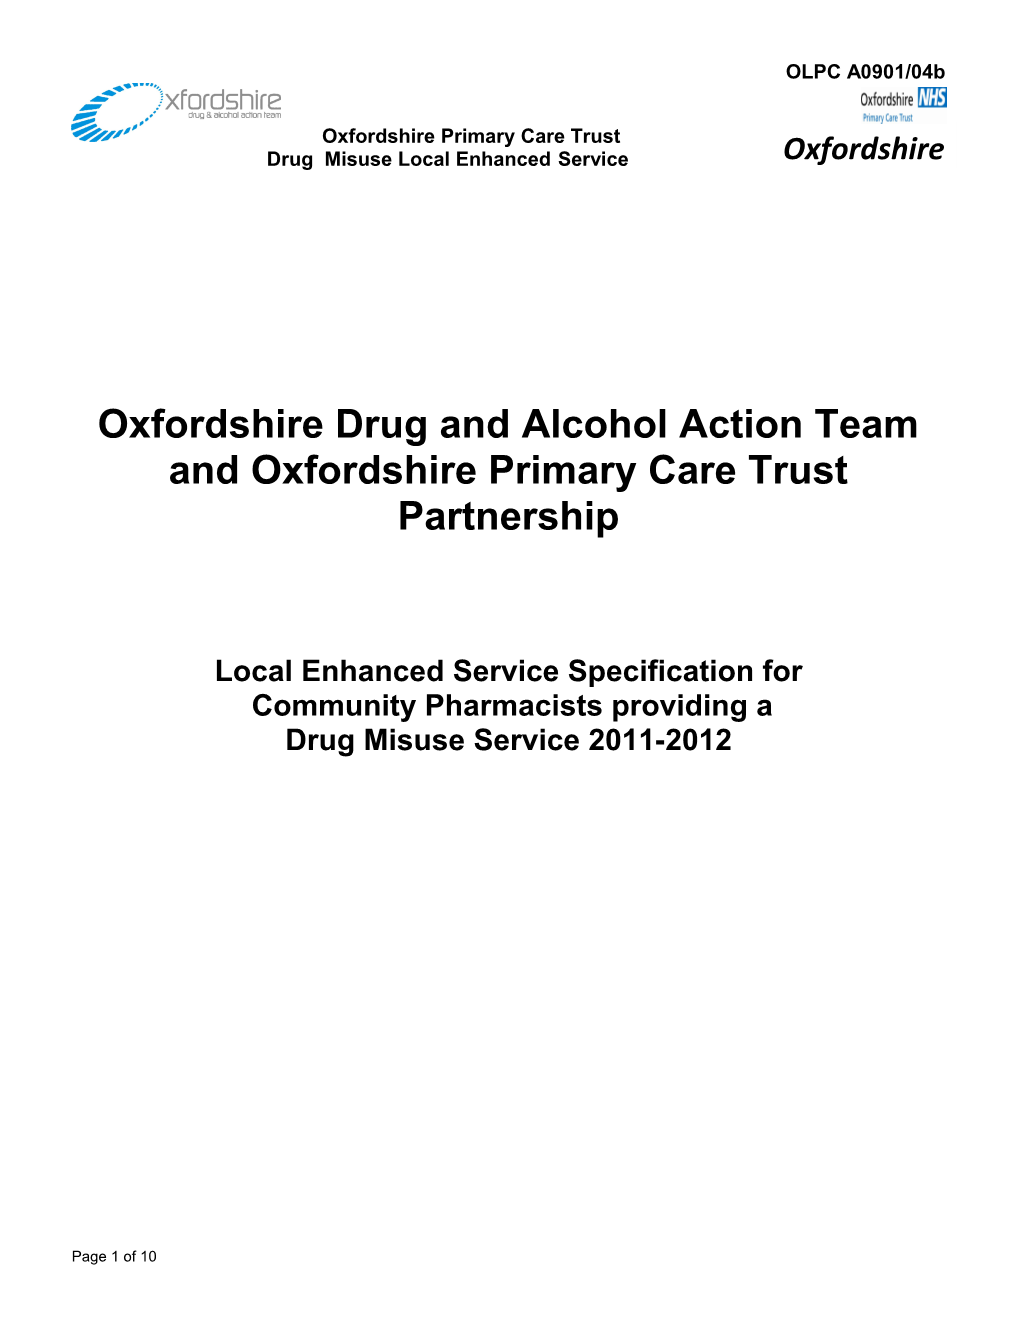 Oxfordshire DAAT and Primary Care Trust Partnership